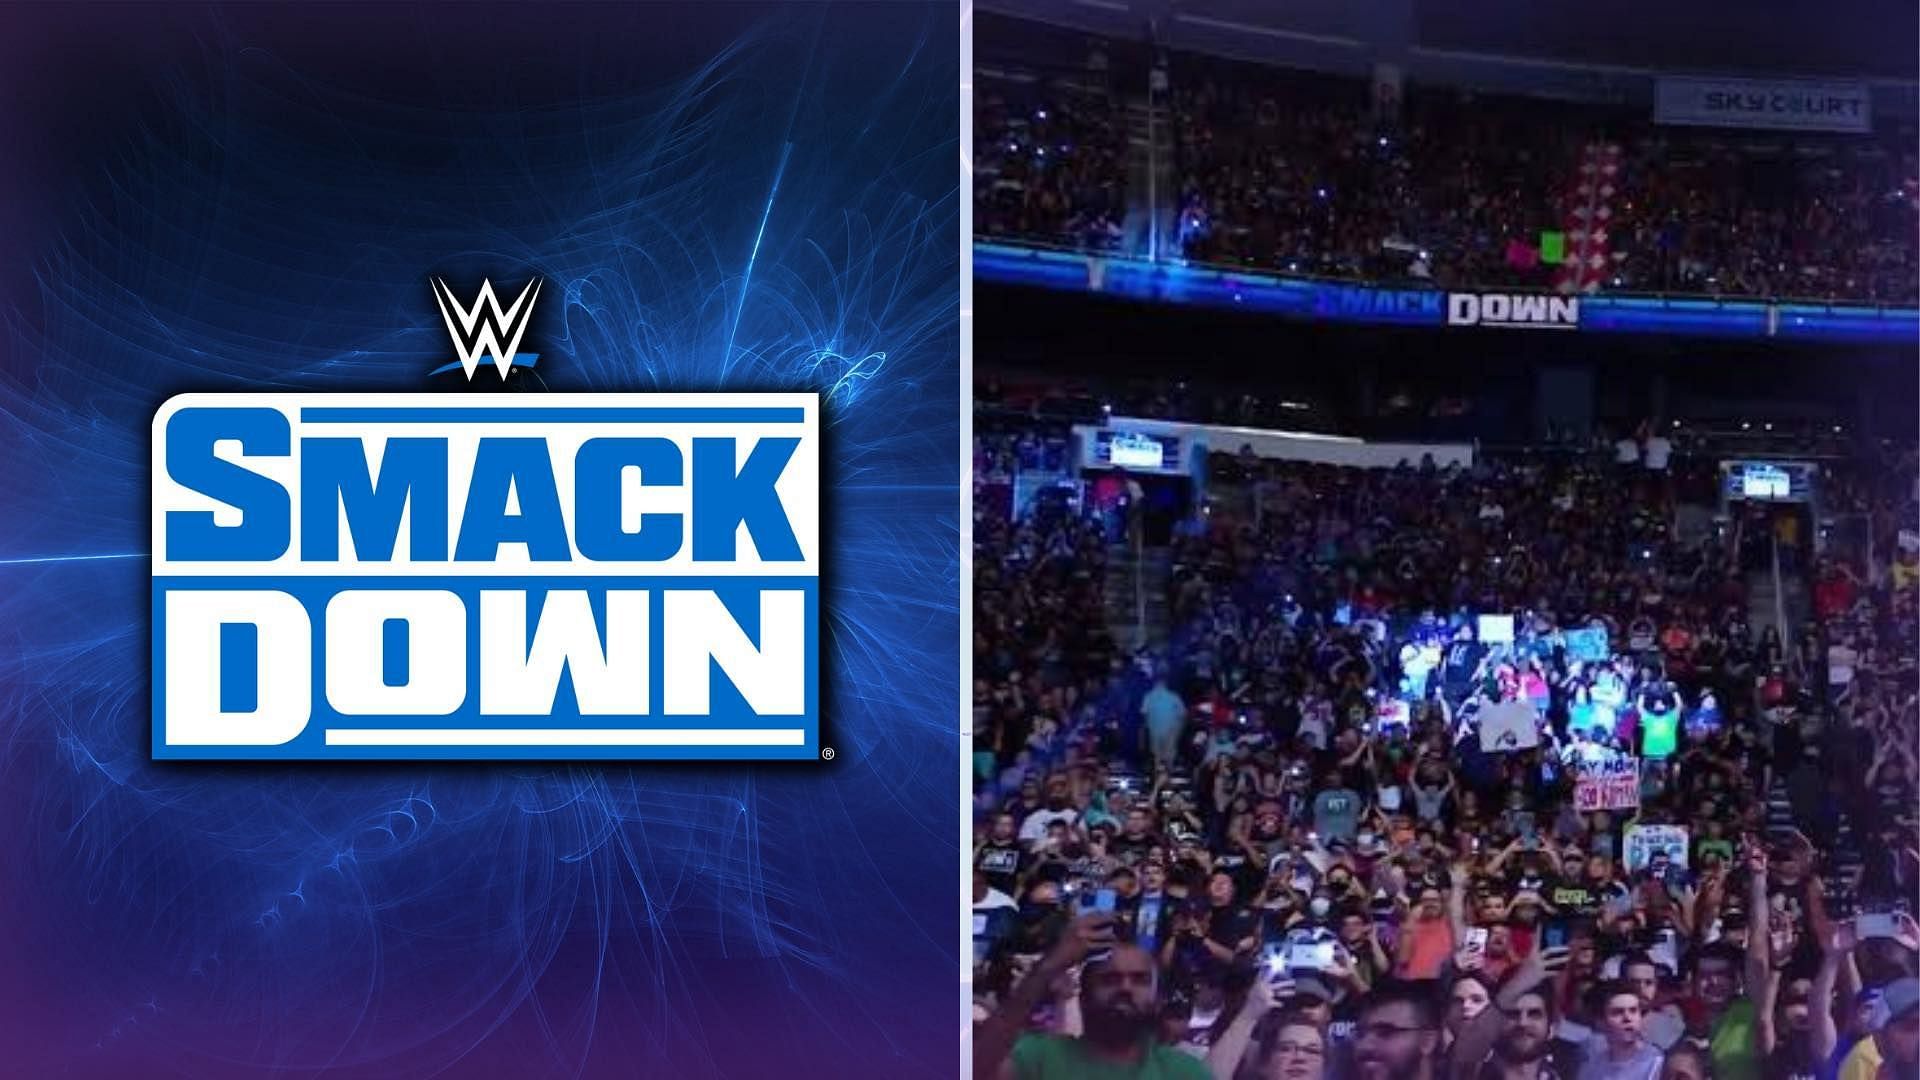 Top tag team teased a new appearance on WWE SmackDown.